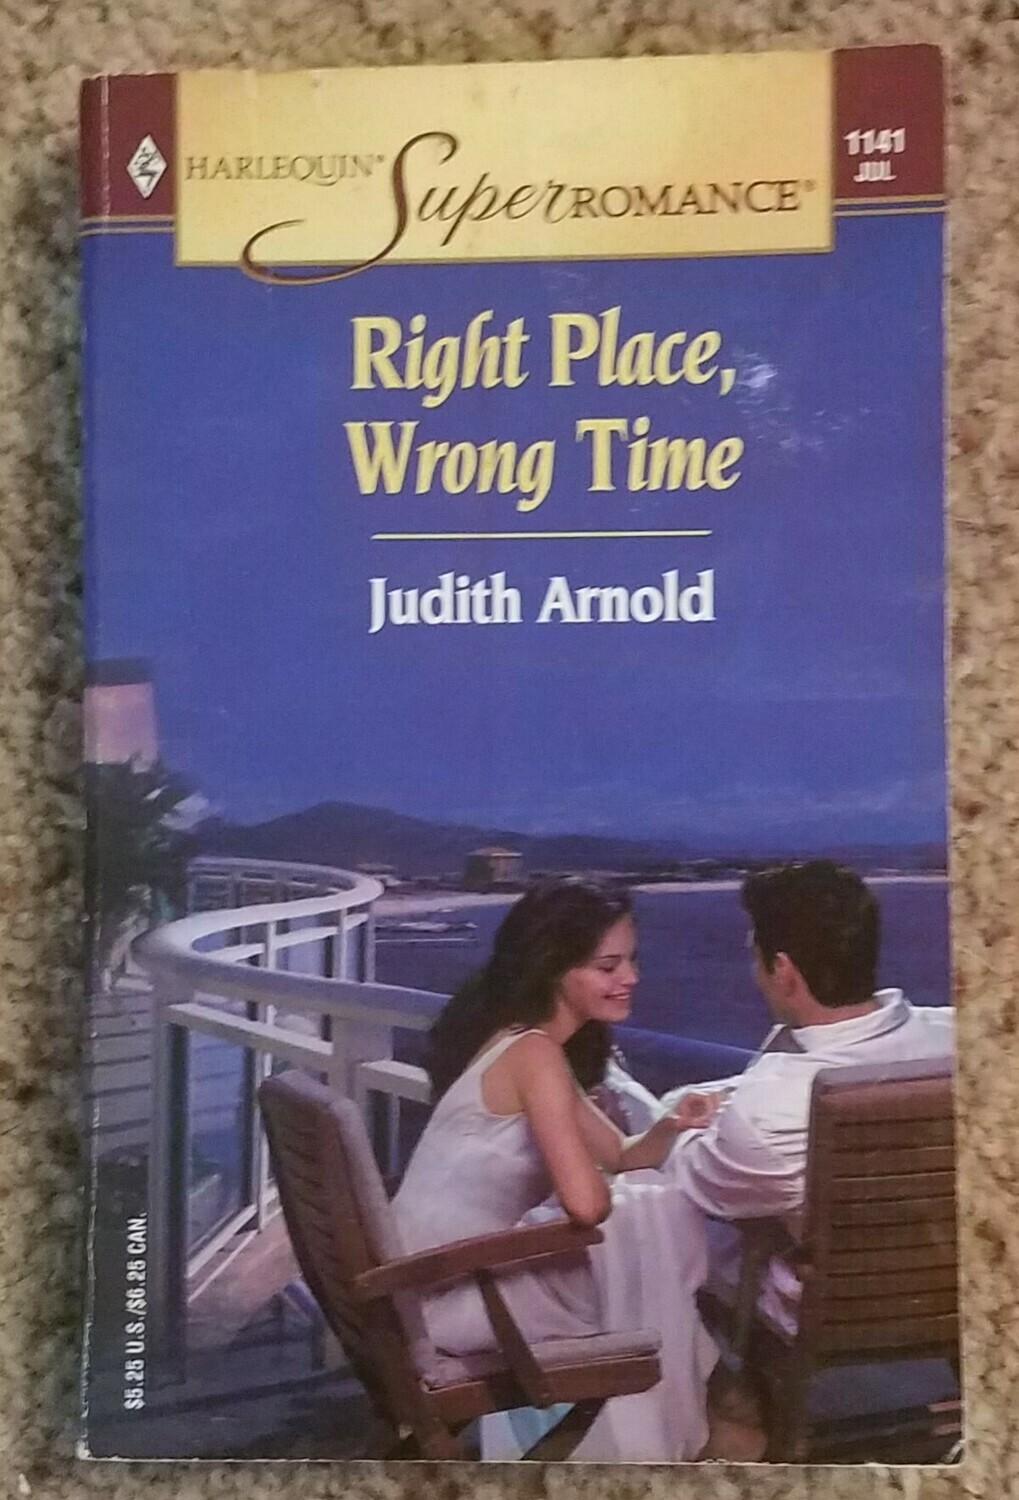 Right Place, Wrong Time by Judith Arnold